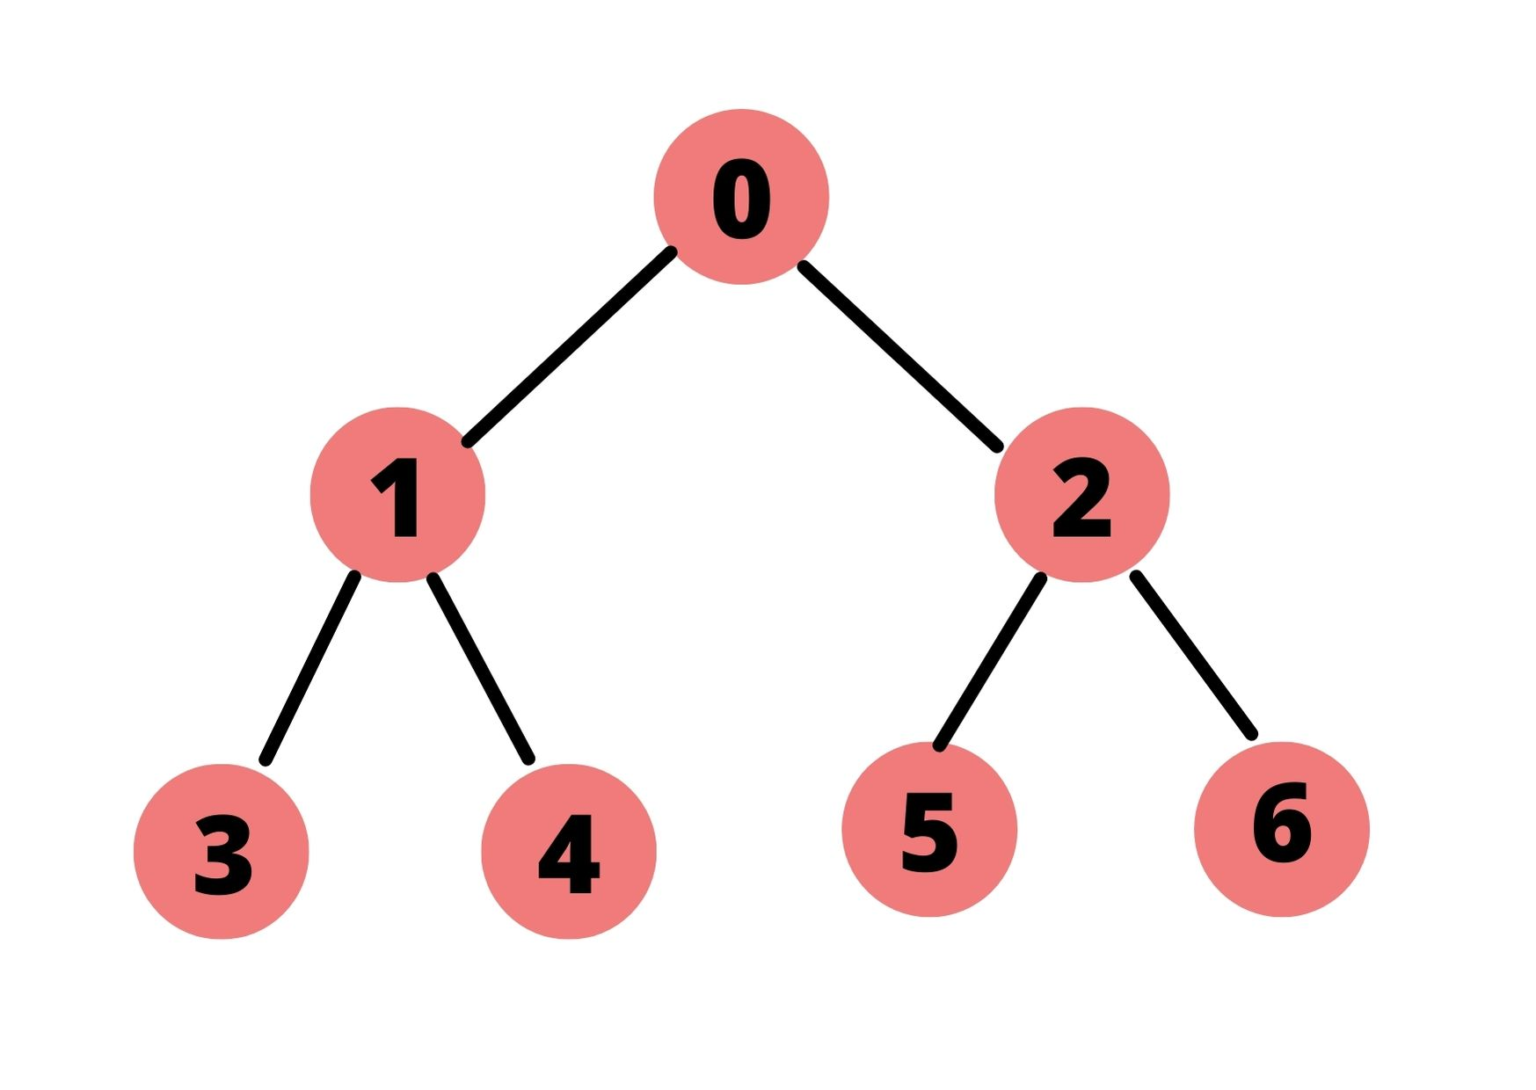 illustrate the traversal using the following tree